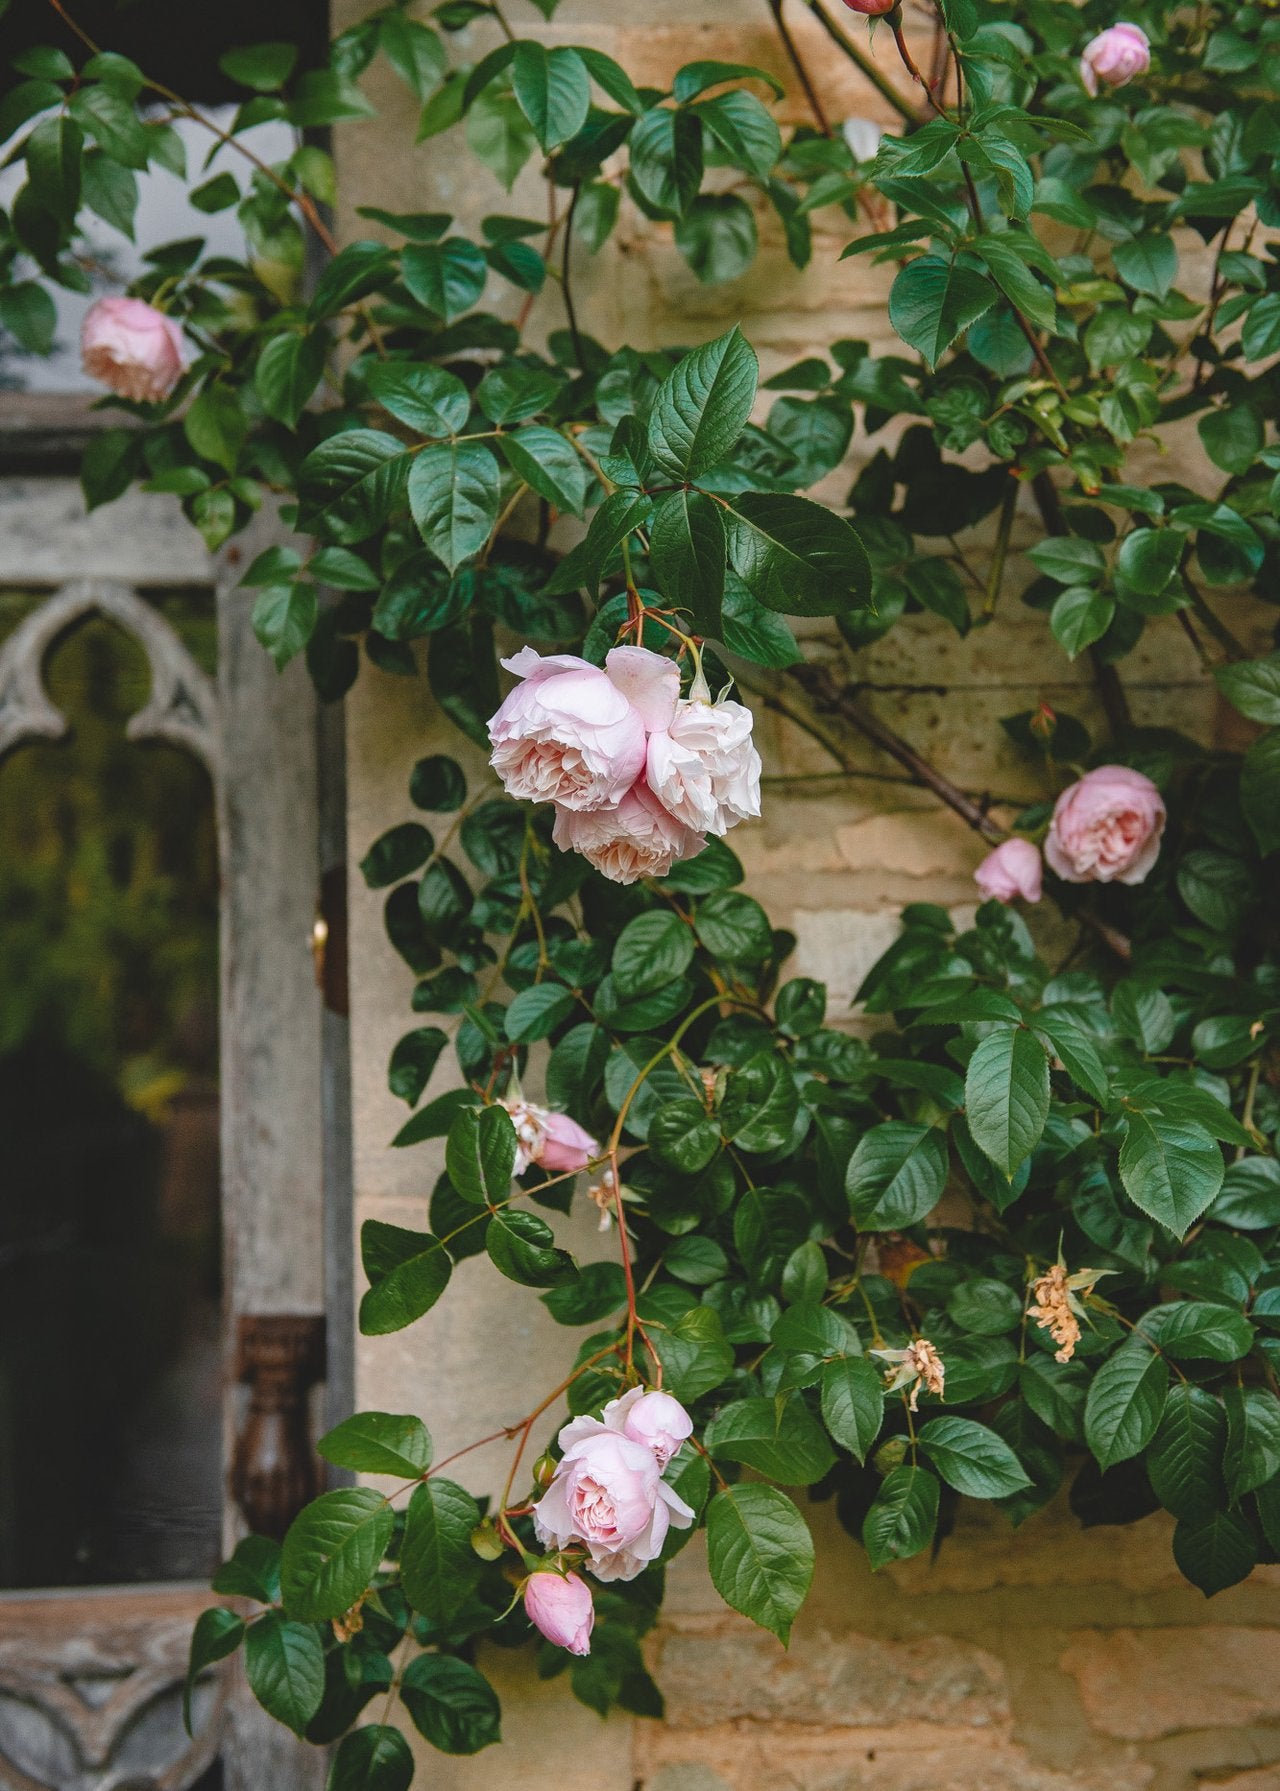 How to: Plant Roses